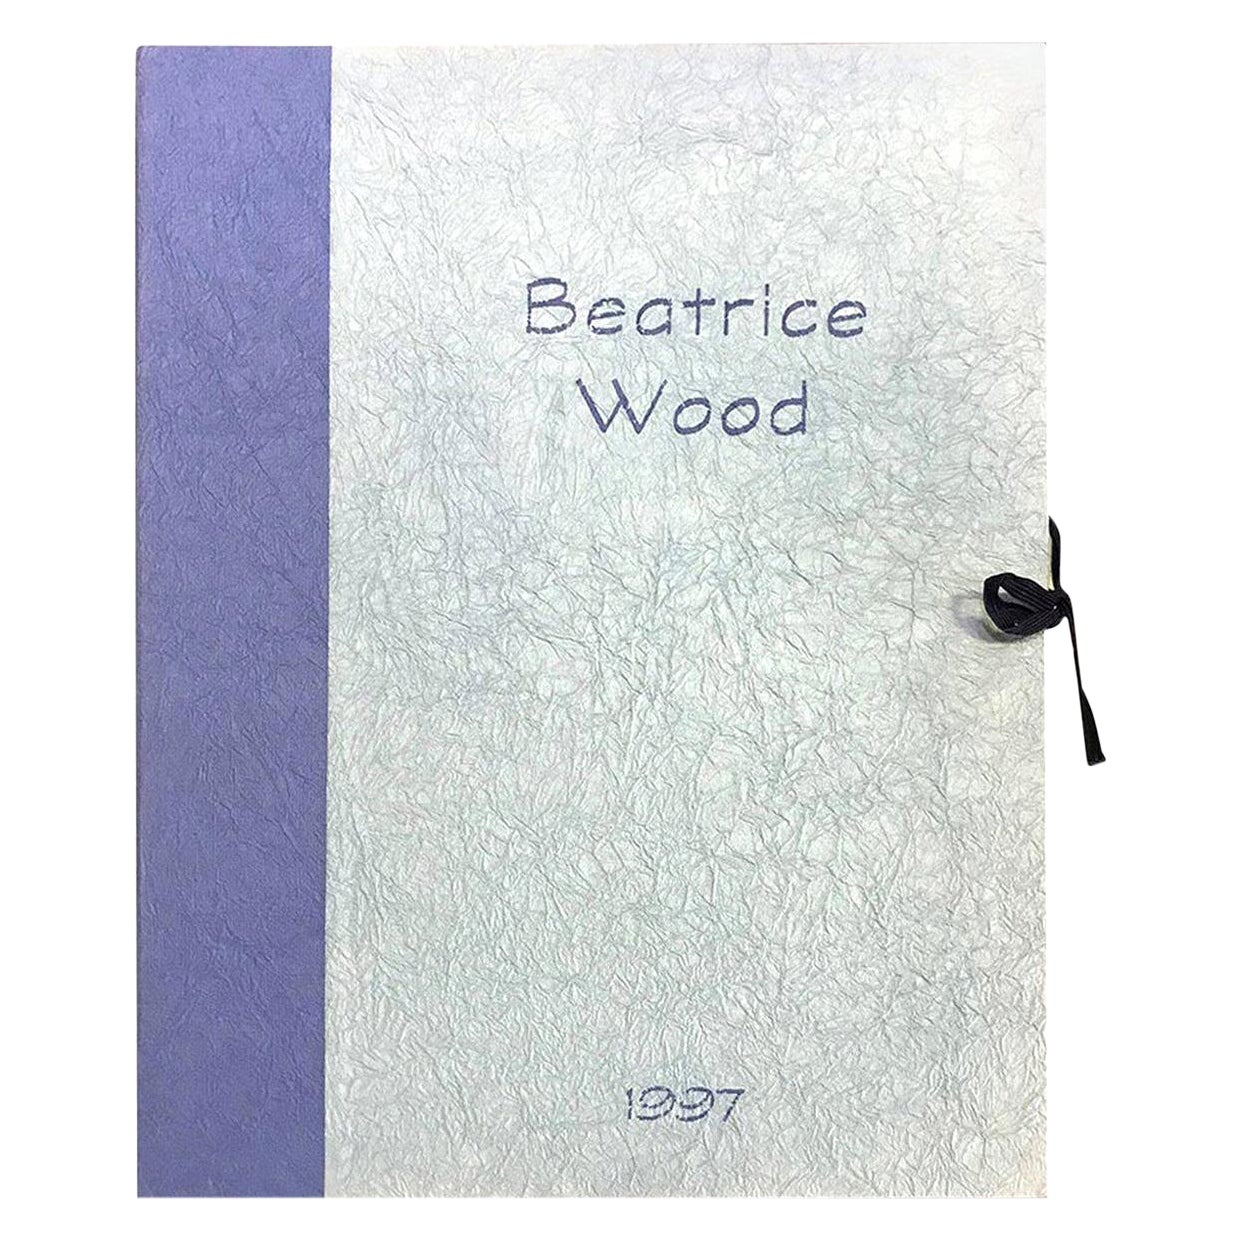 Beatrice Wood Signed Limited Edition Lithograph Portfolio American Crafts Museum